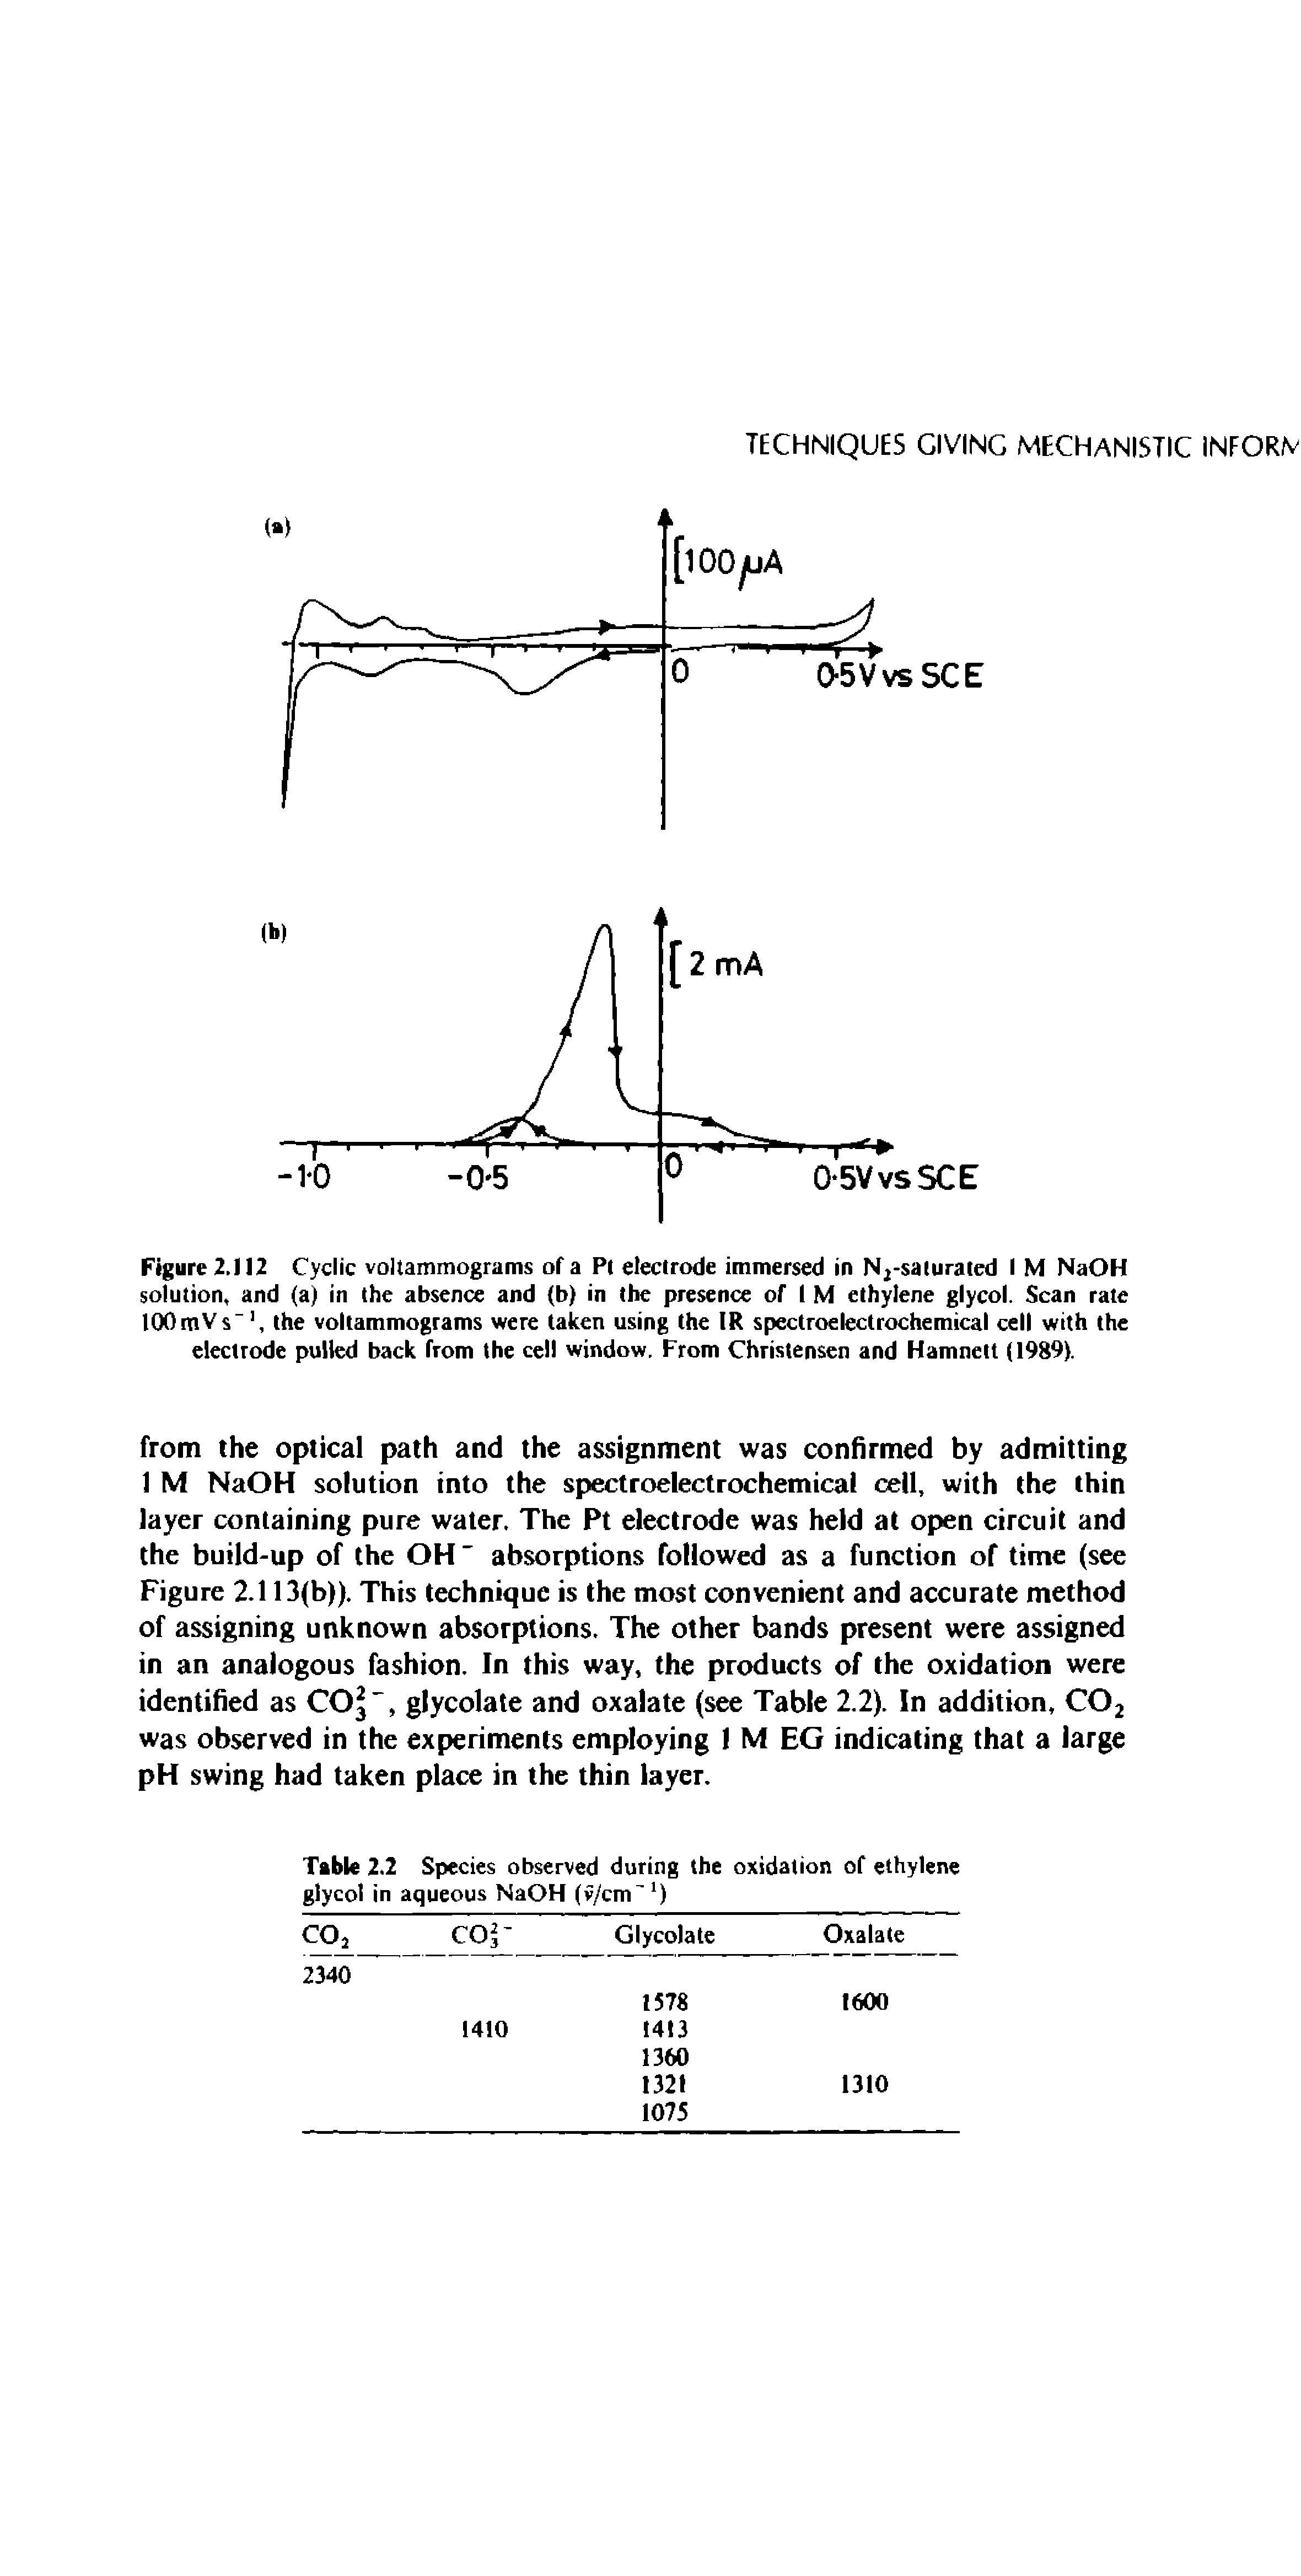 Figure 2.112 Cyclic voltammograms of a P( electrode immersed in N2-saturated I M NaOH solution, and (a) in the absence and (b) in the presence of I M ethylene glycol. Scan rate 100mVs-1, the voltammograms were taken using the IR spectroelectrochemical cell with the electrode pulled back from the cell window. From Christensen and Hamnett (1989).